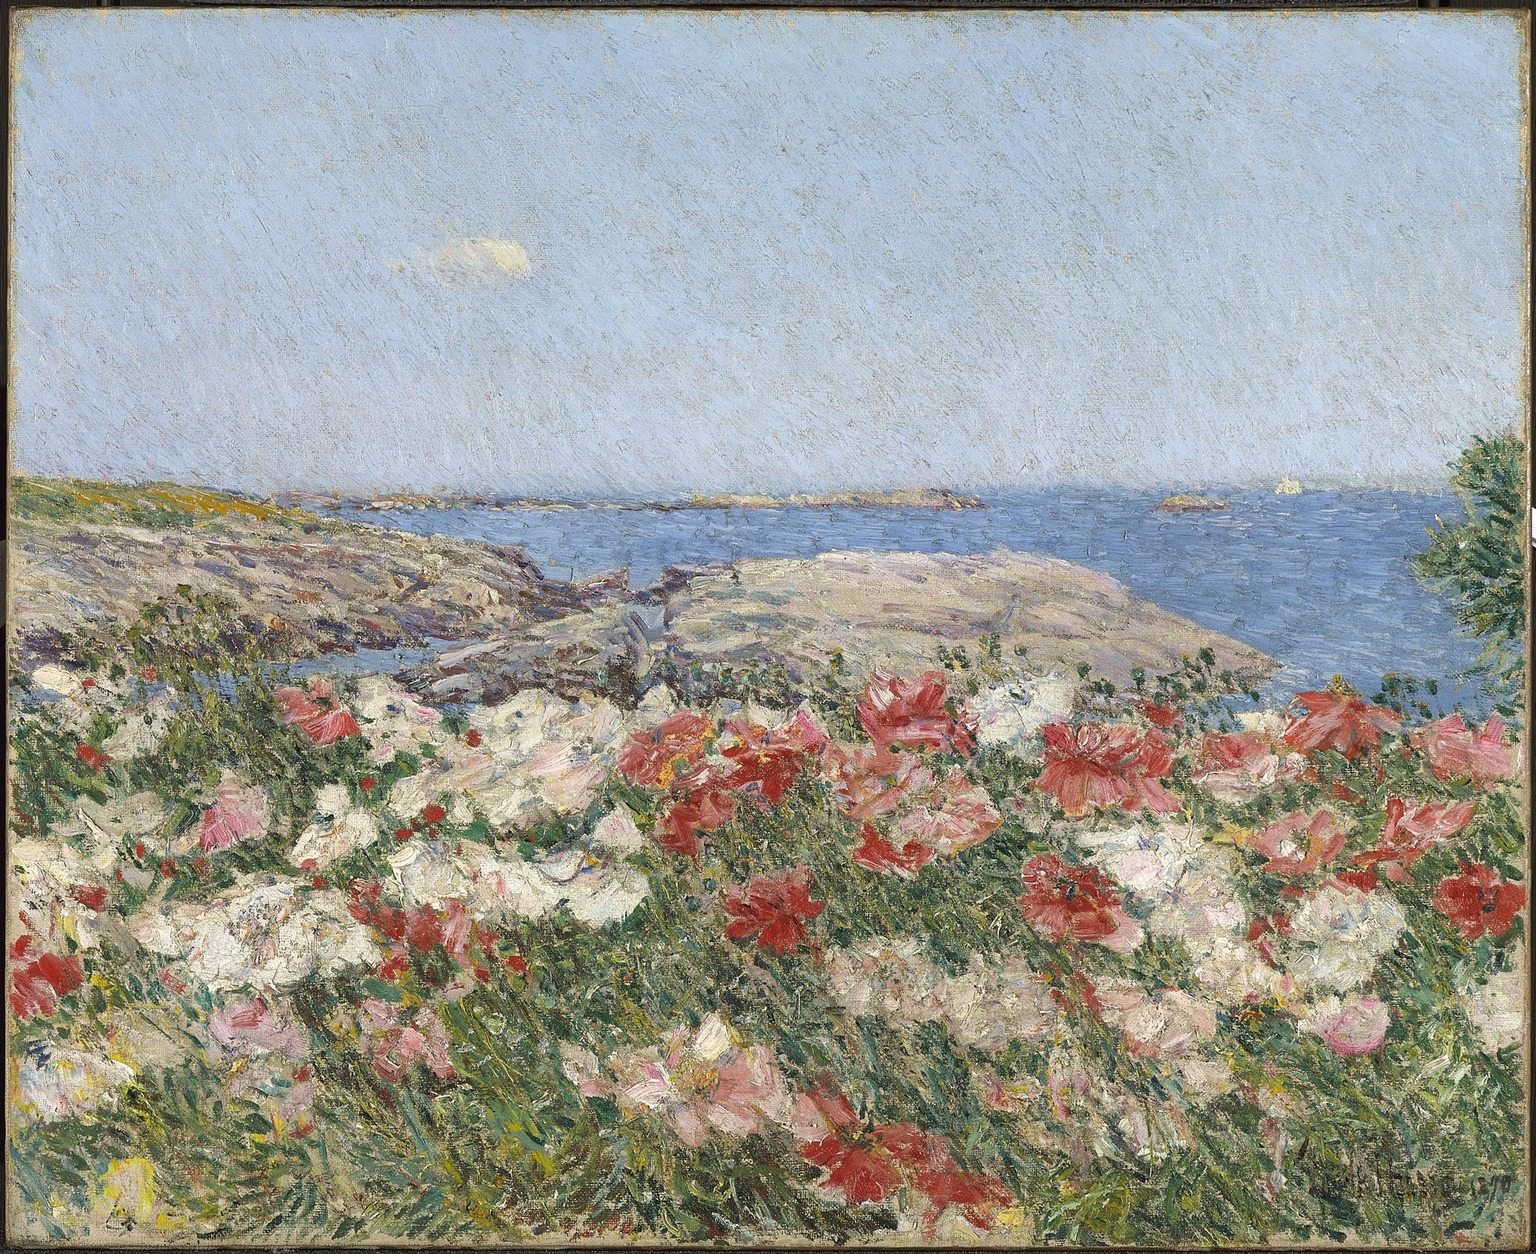 1891 by Childe Hassam Seascape Art Print Poster 24x28 Poppies Isles of Shoals 